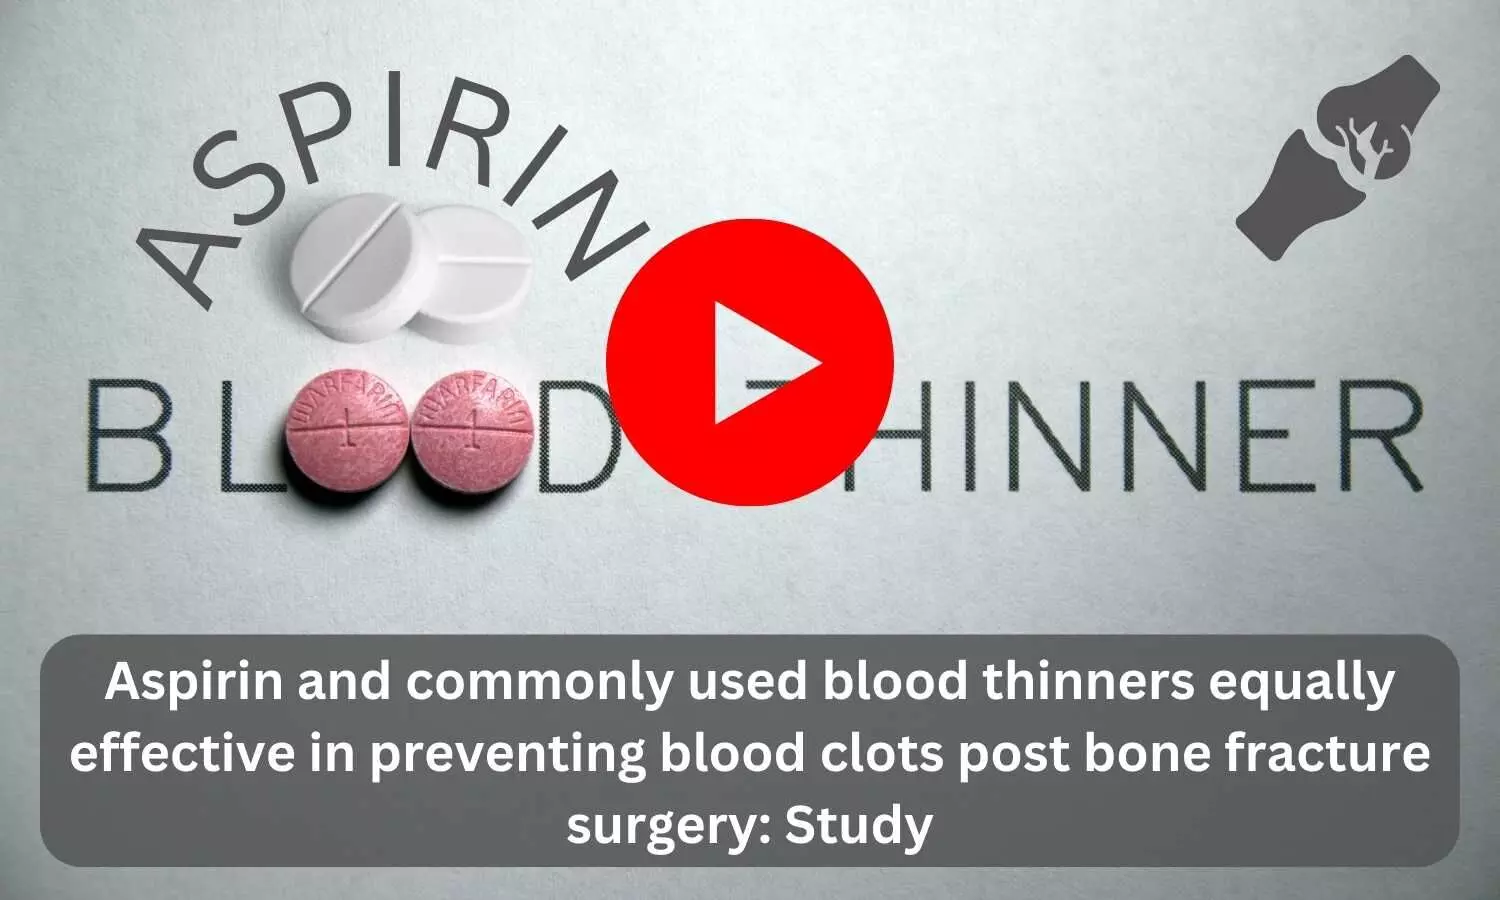 Aspirin and commonly used blood thinners equally effective in preventing blood clots post bone fracture surgery: Study